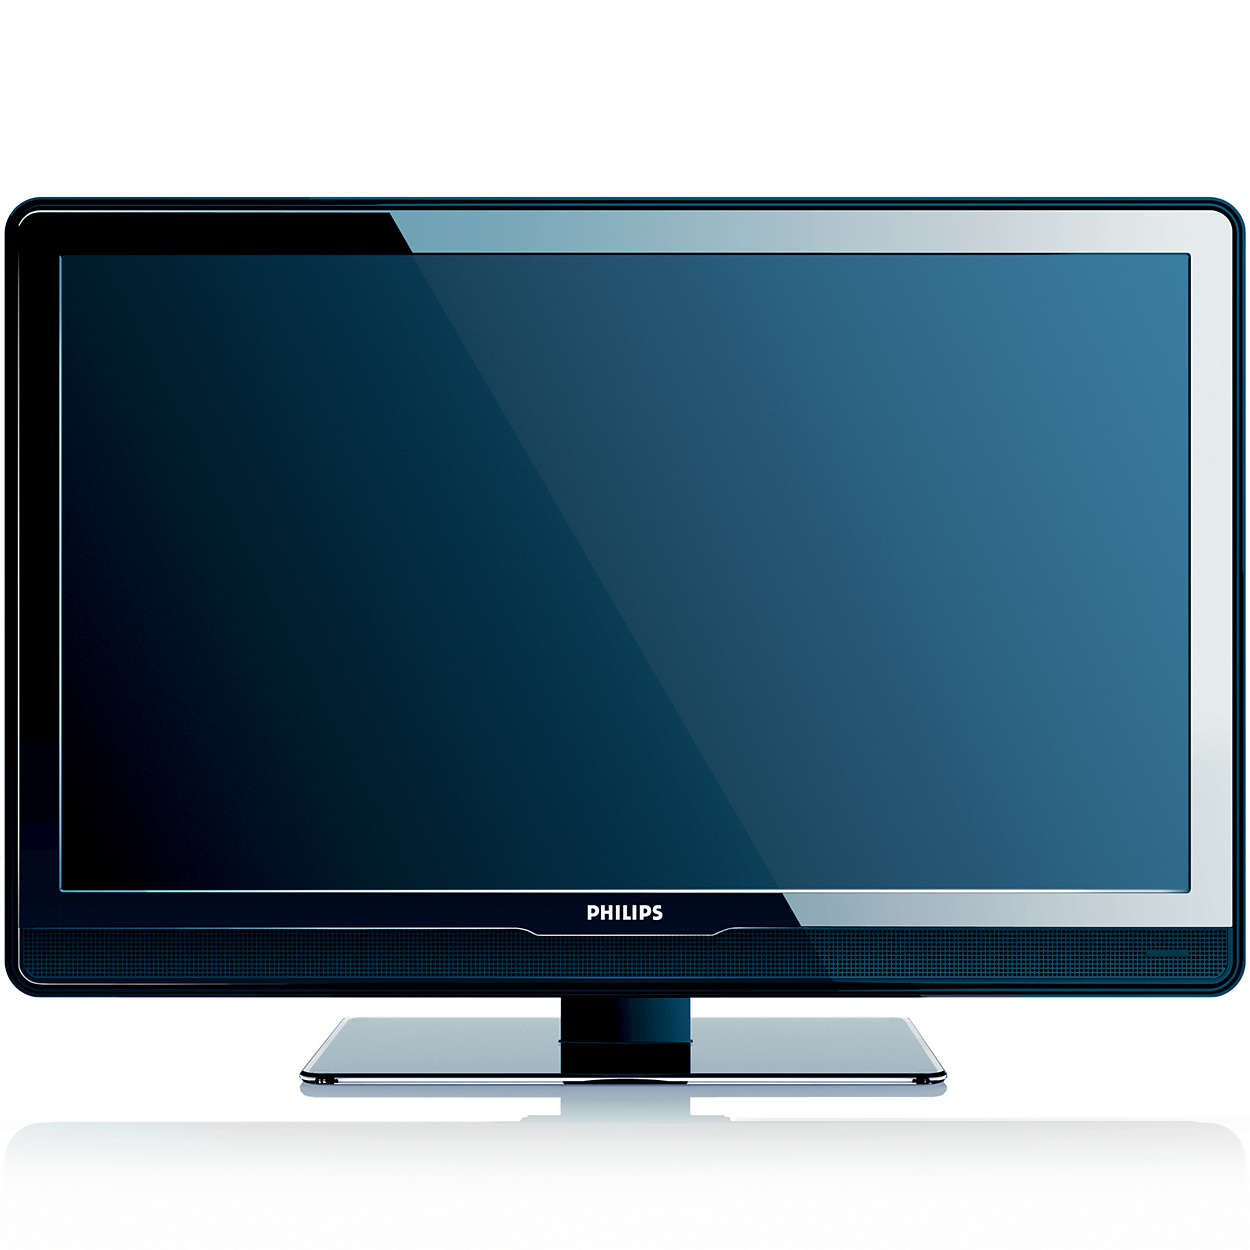 LG 42LF5500 42inch 106cm Full HD LED LCD TV reviewed by 